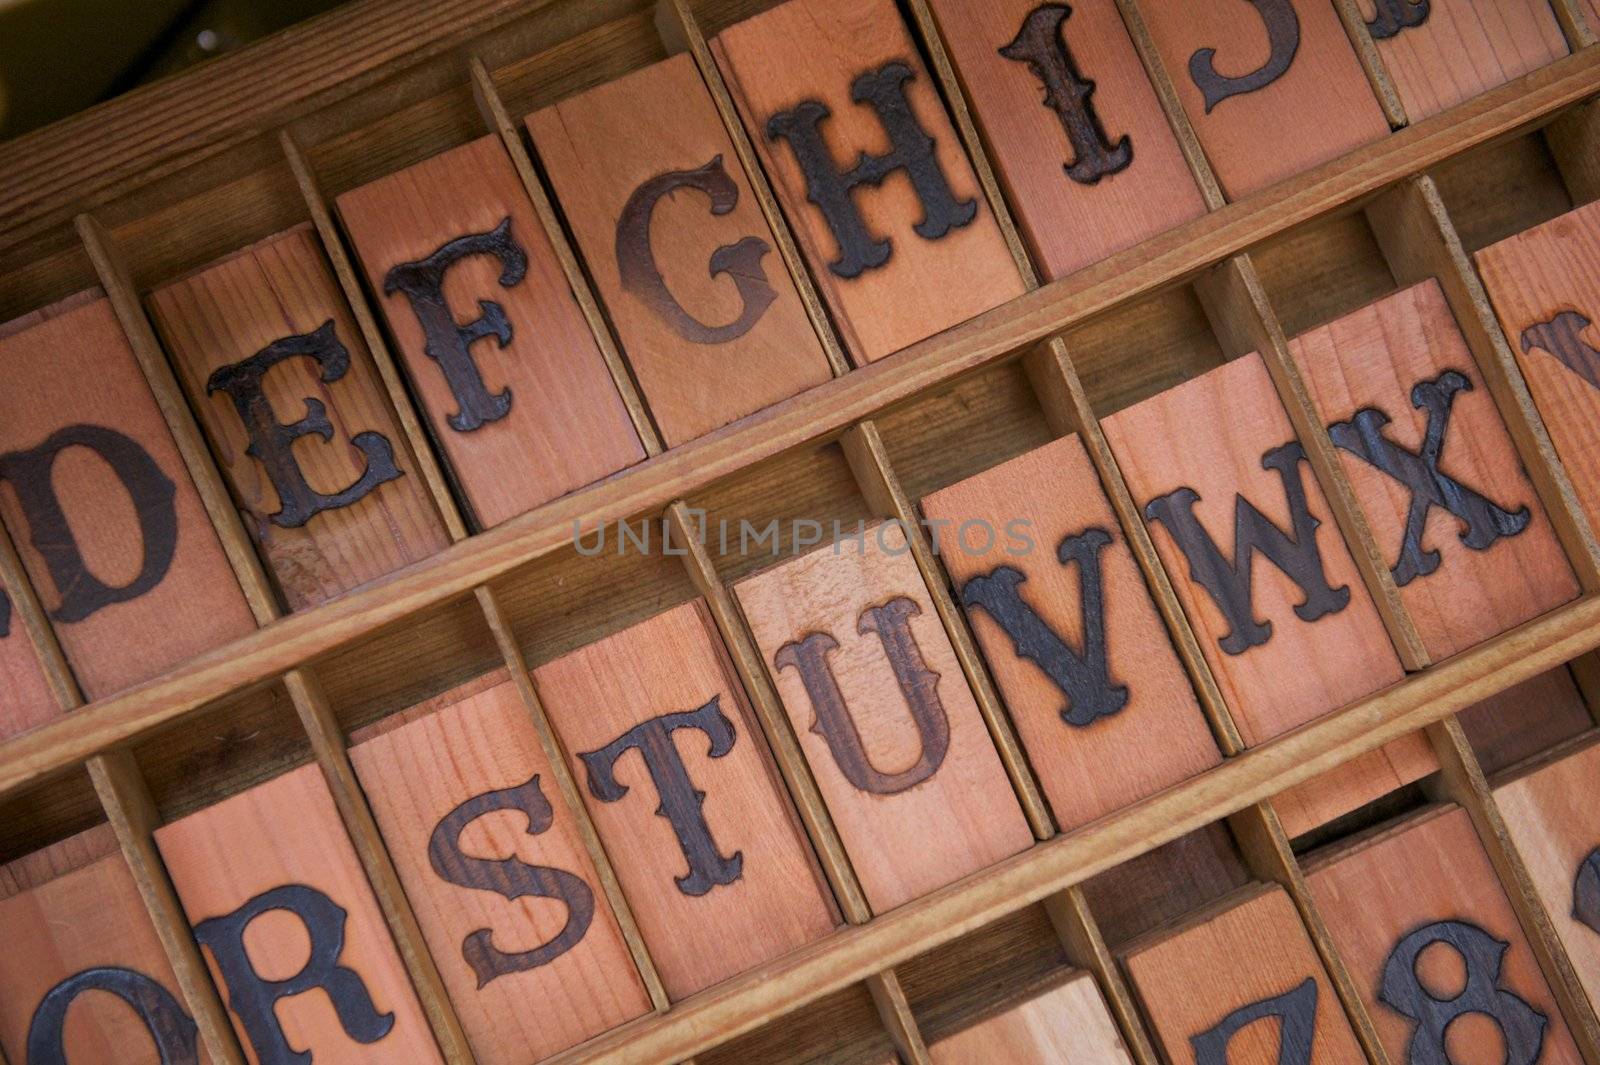 Blocks of wood with letters branded into them